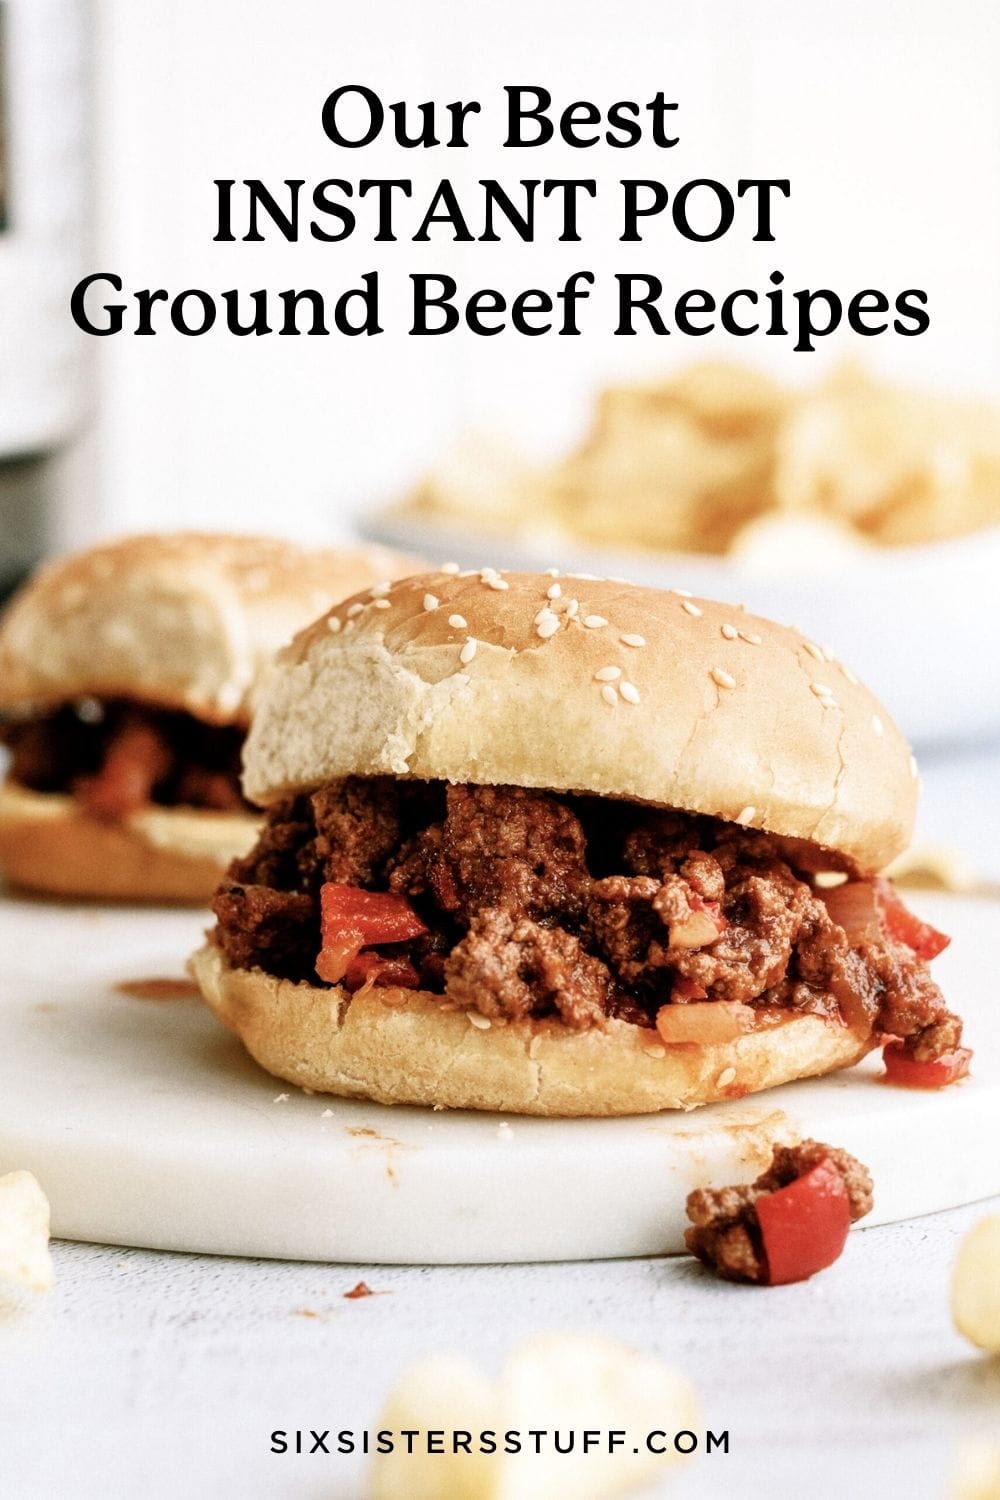 27 of the Best Instant Pot Ground Beef Recipes